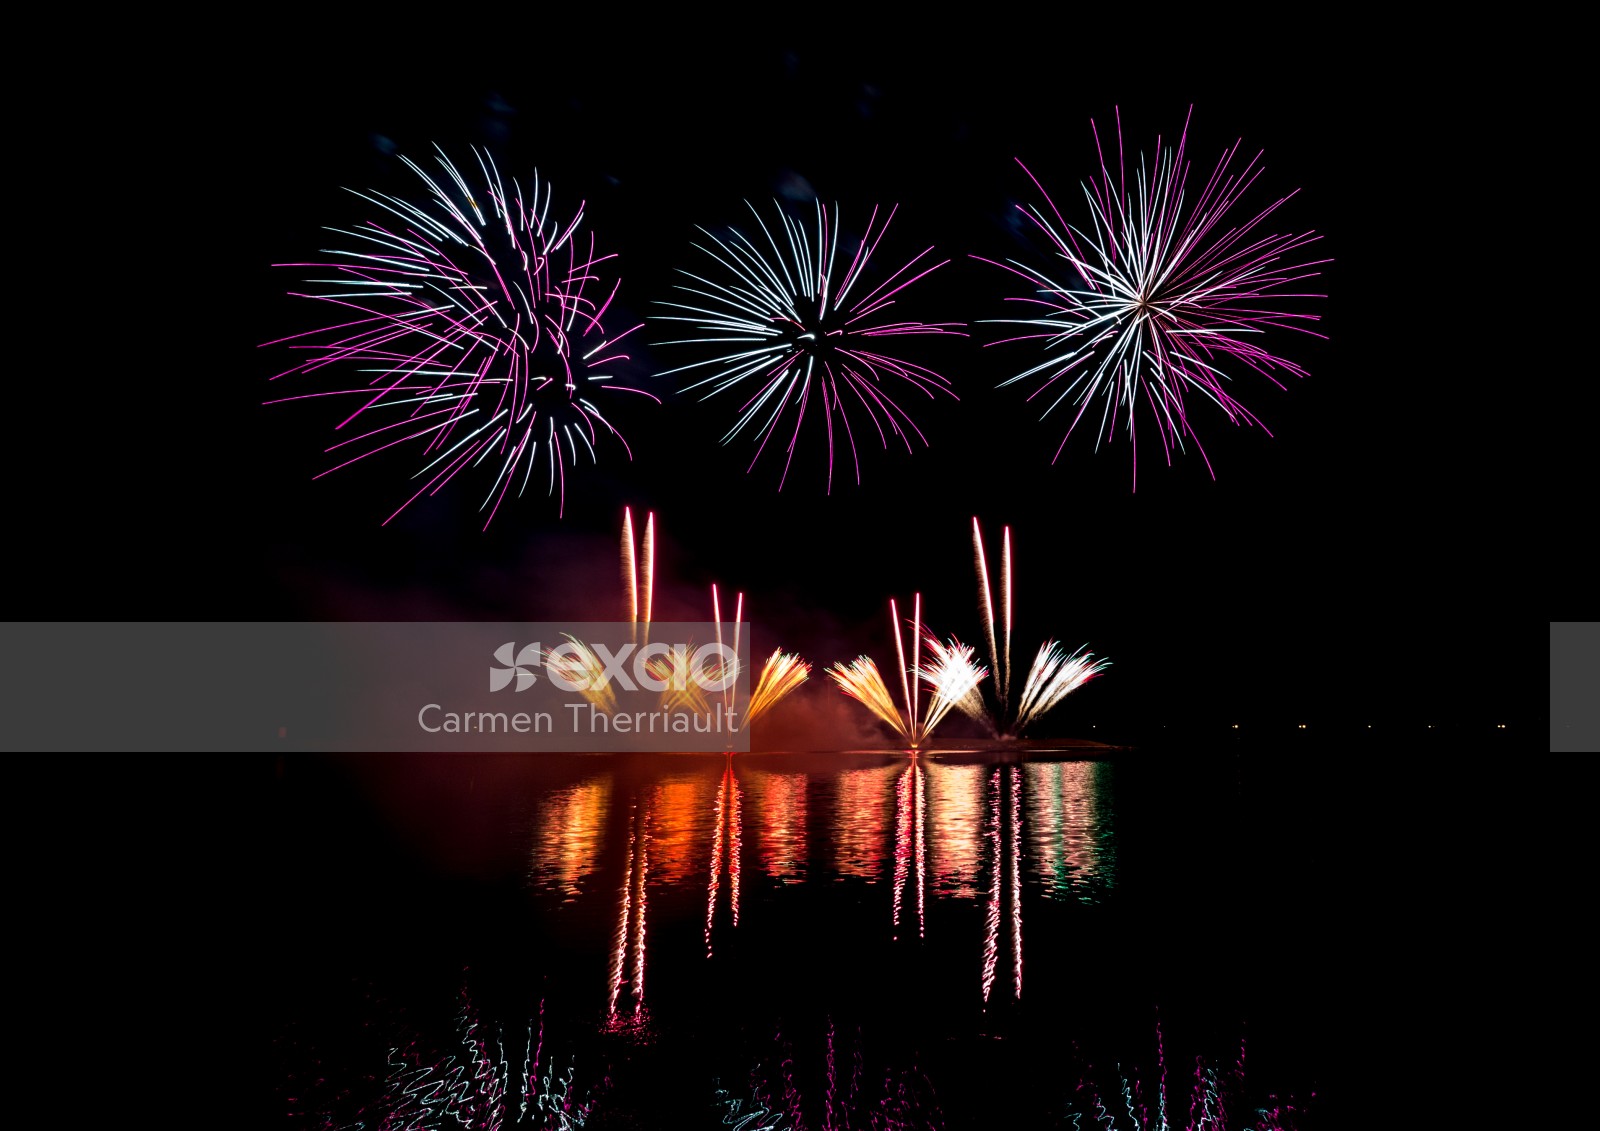 Reflected fireworks